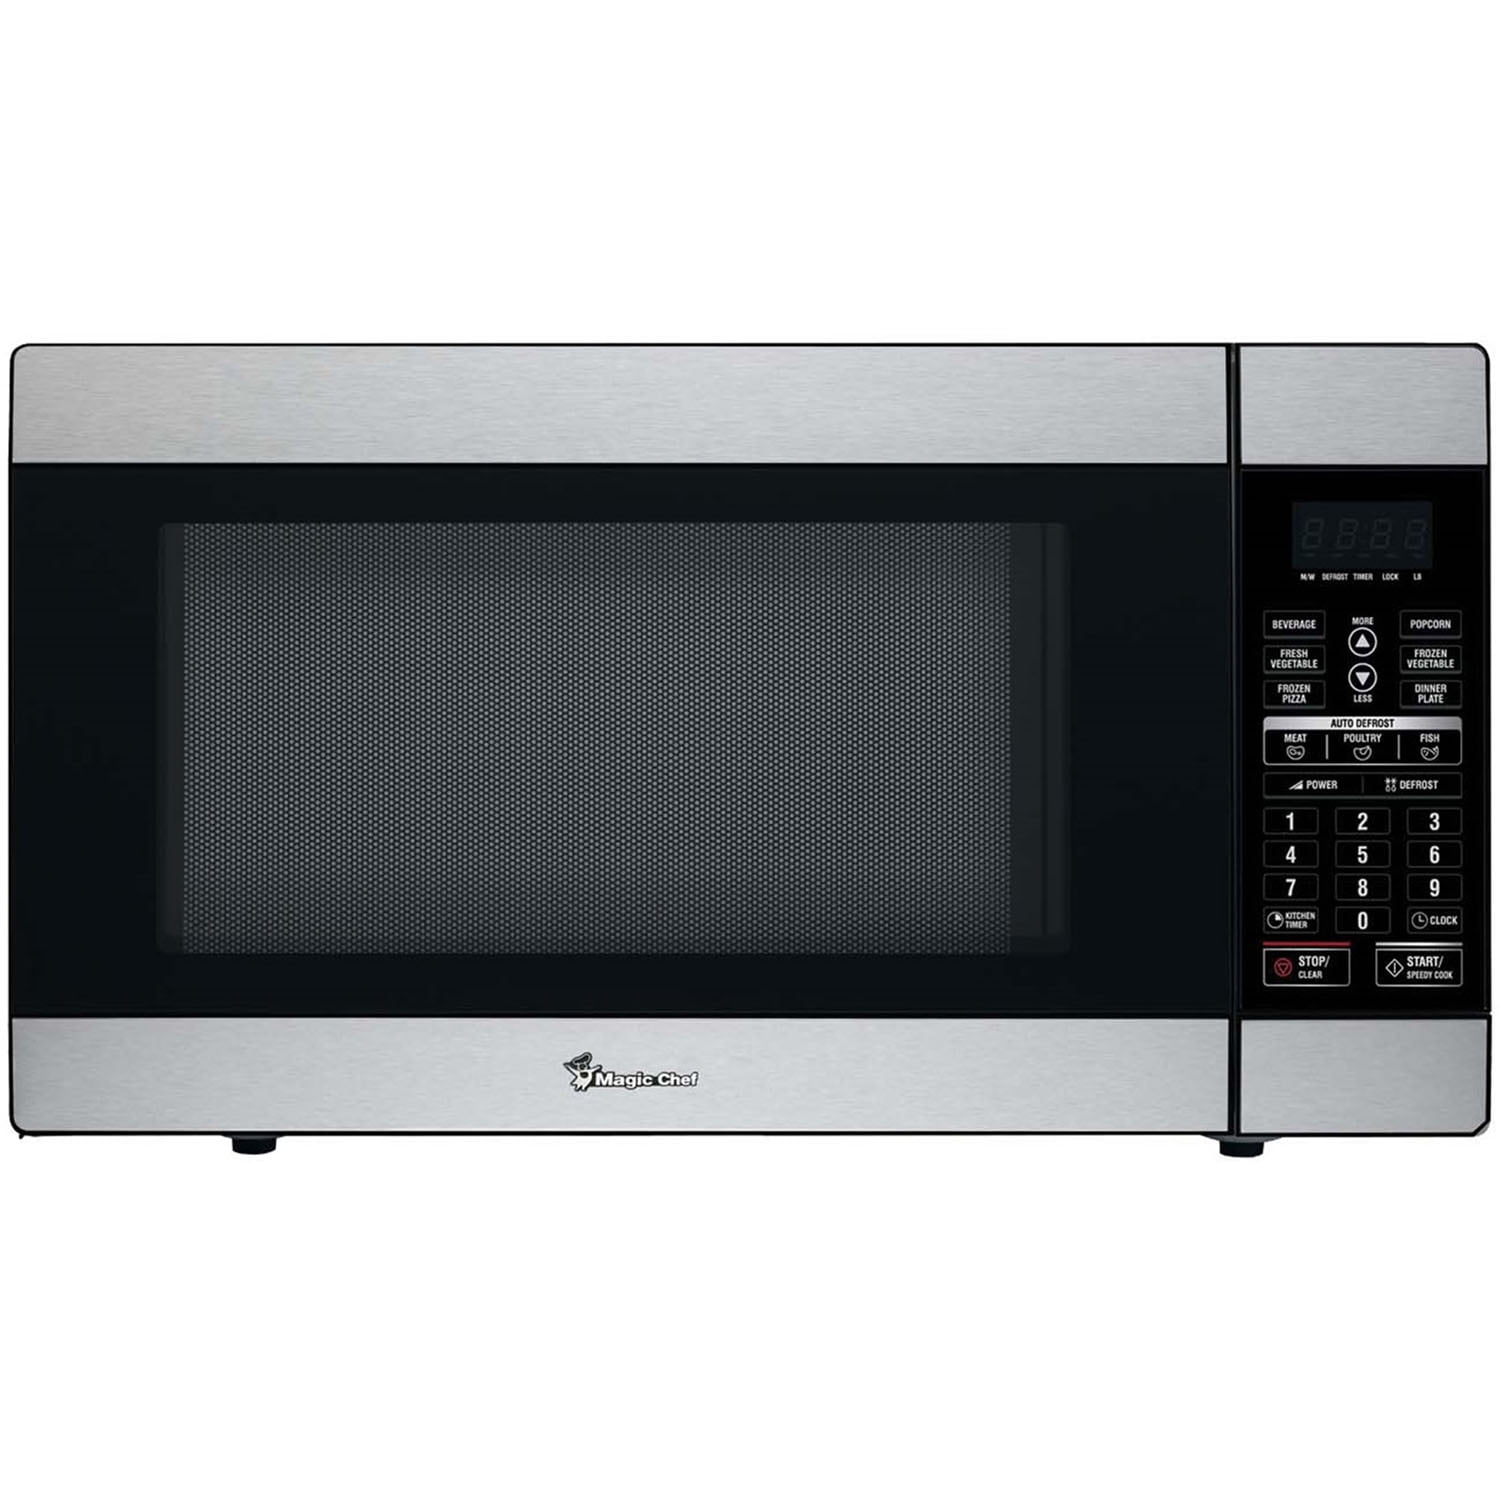 Magic Chef 1 8 Cu Ft 1100w Countertop Microwave Oven In